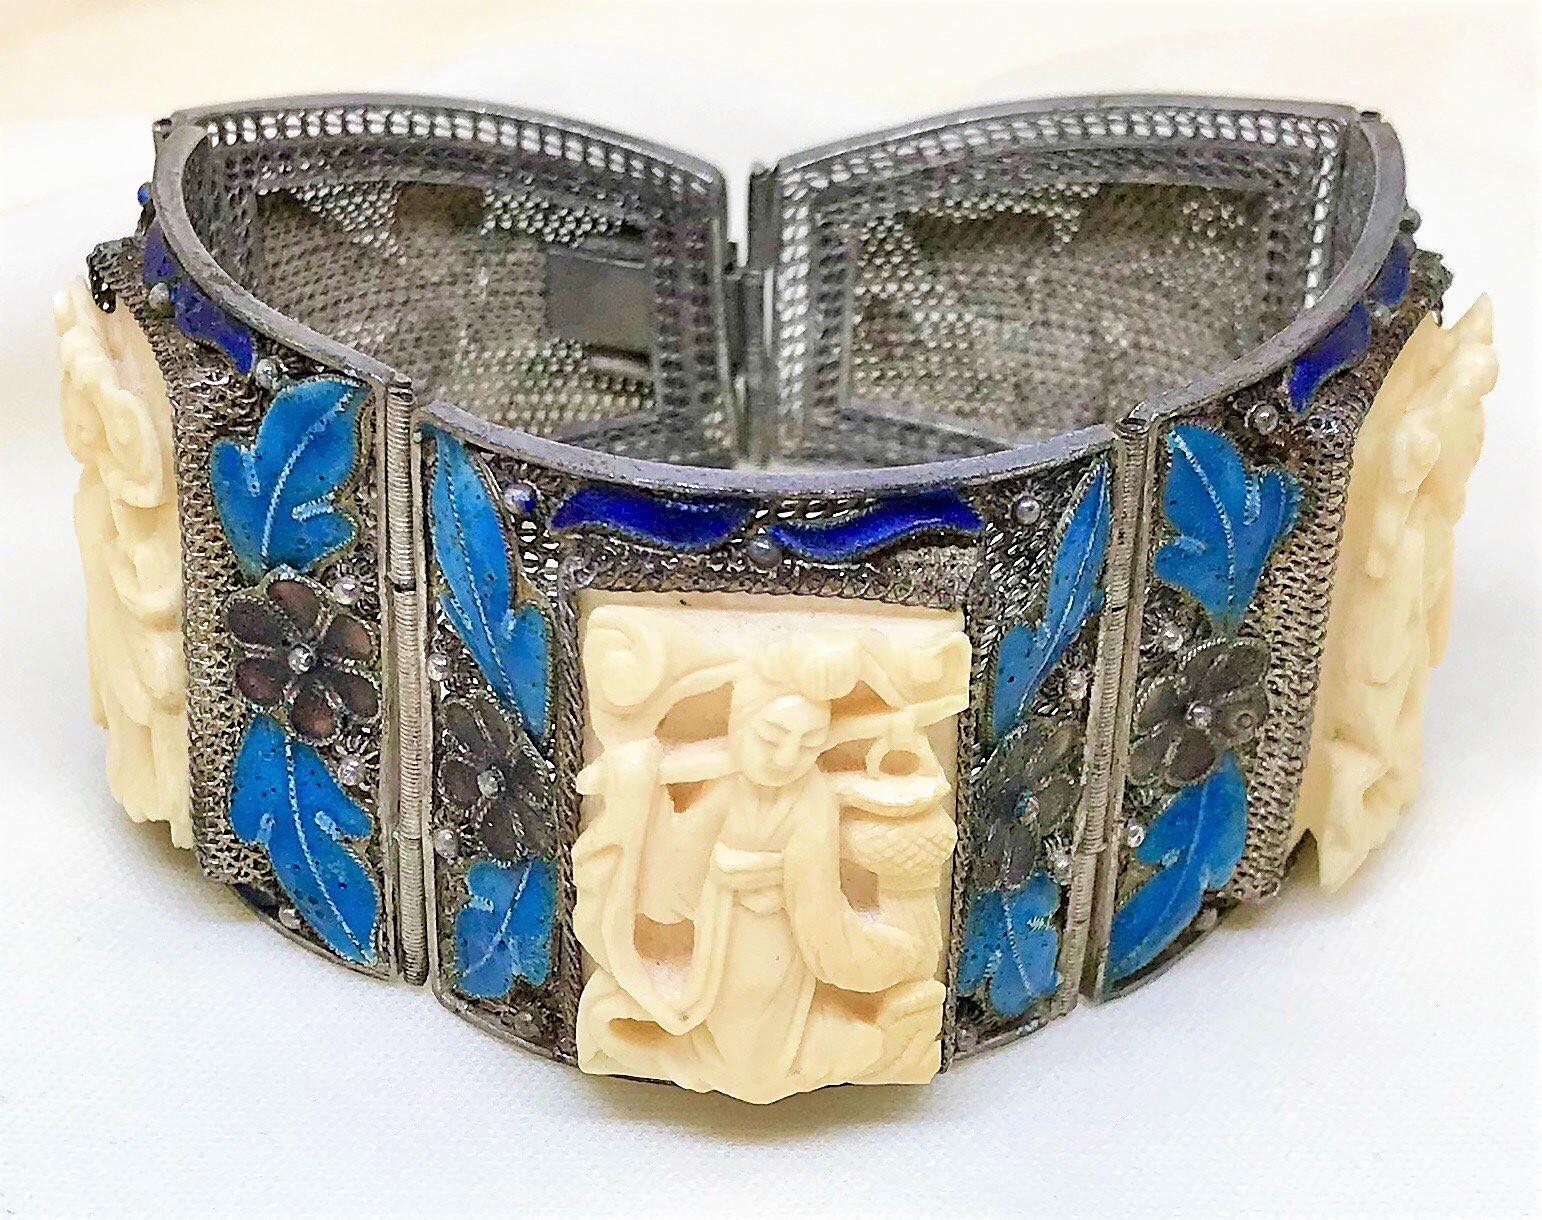 Circa 1940s Chinese sterling silver bracelet made up of five ornate mesh sections.  It is embellished with sterling floral, leaf and moth motifs enameled in purple, turquoise and dark blue enameling. The bracelet is bezel set with three, off-white,